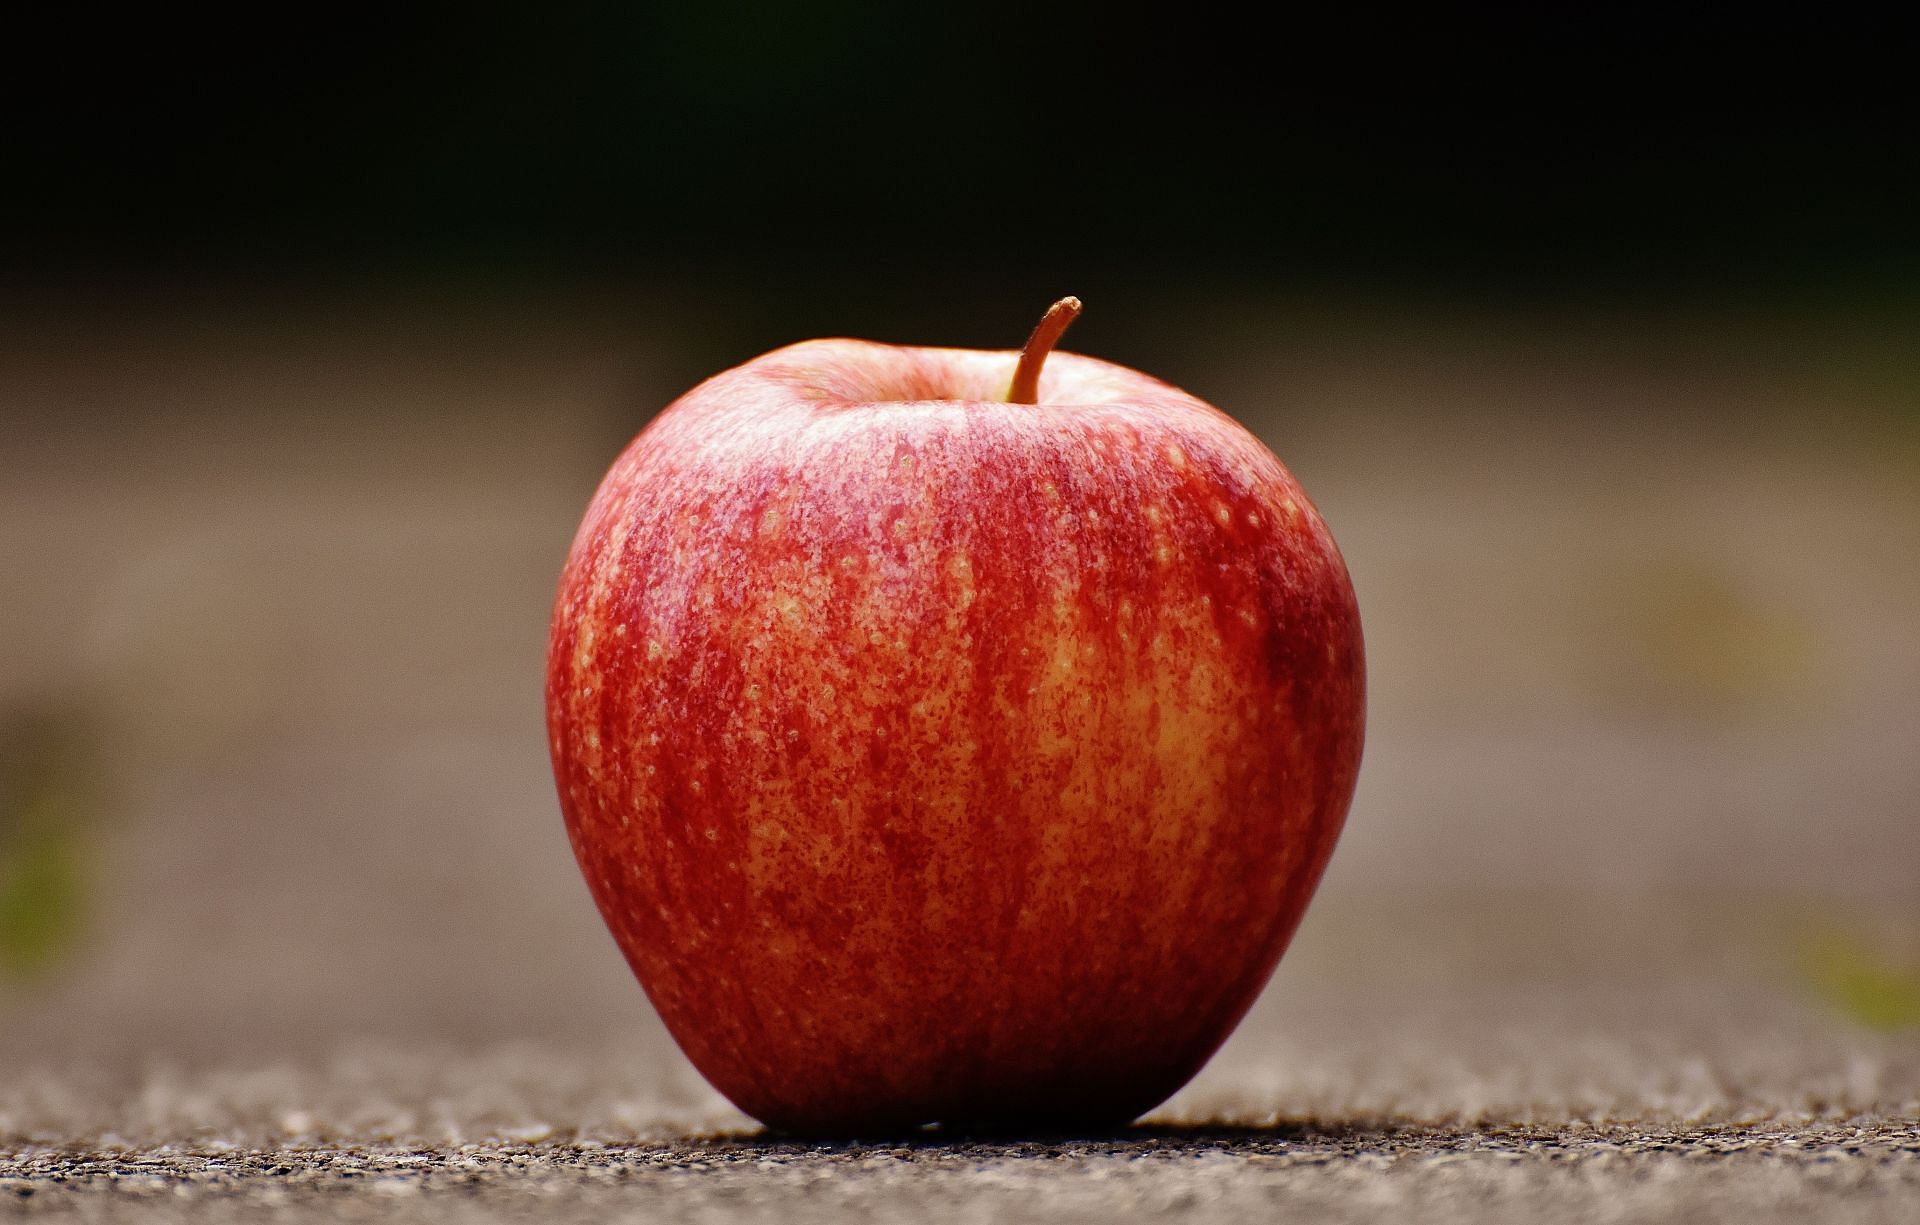 Counting Calories in Apples: The Sweet and Healthy Choice